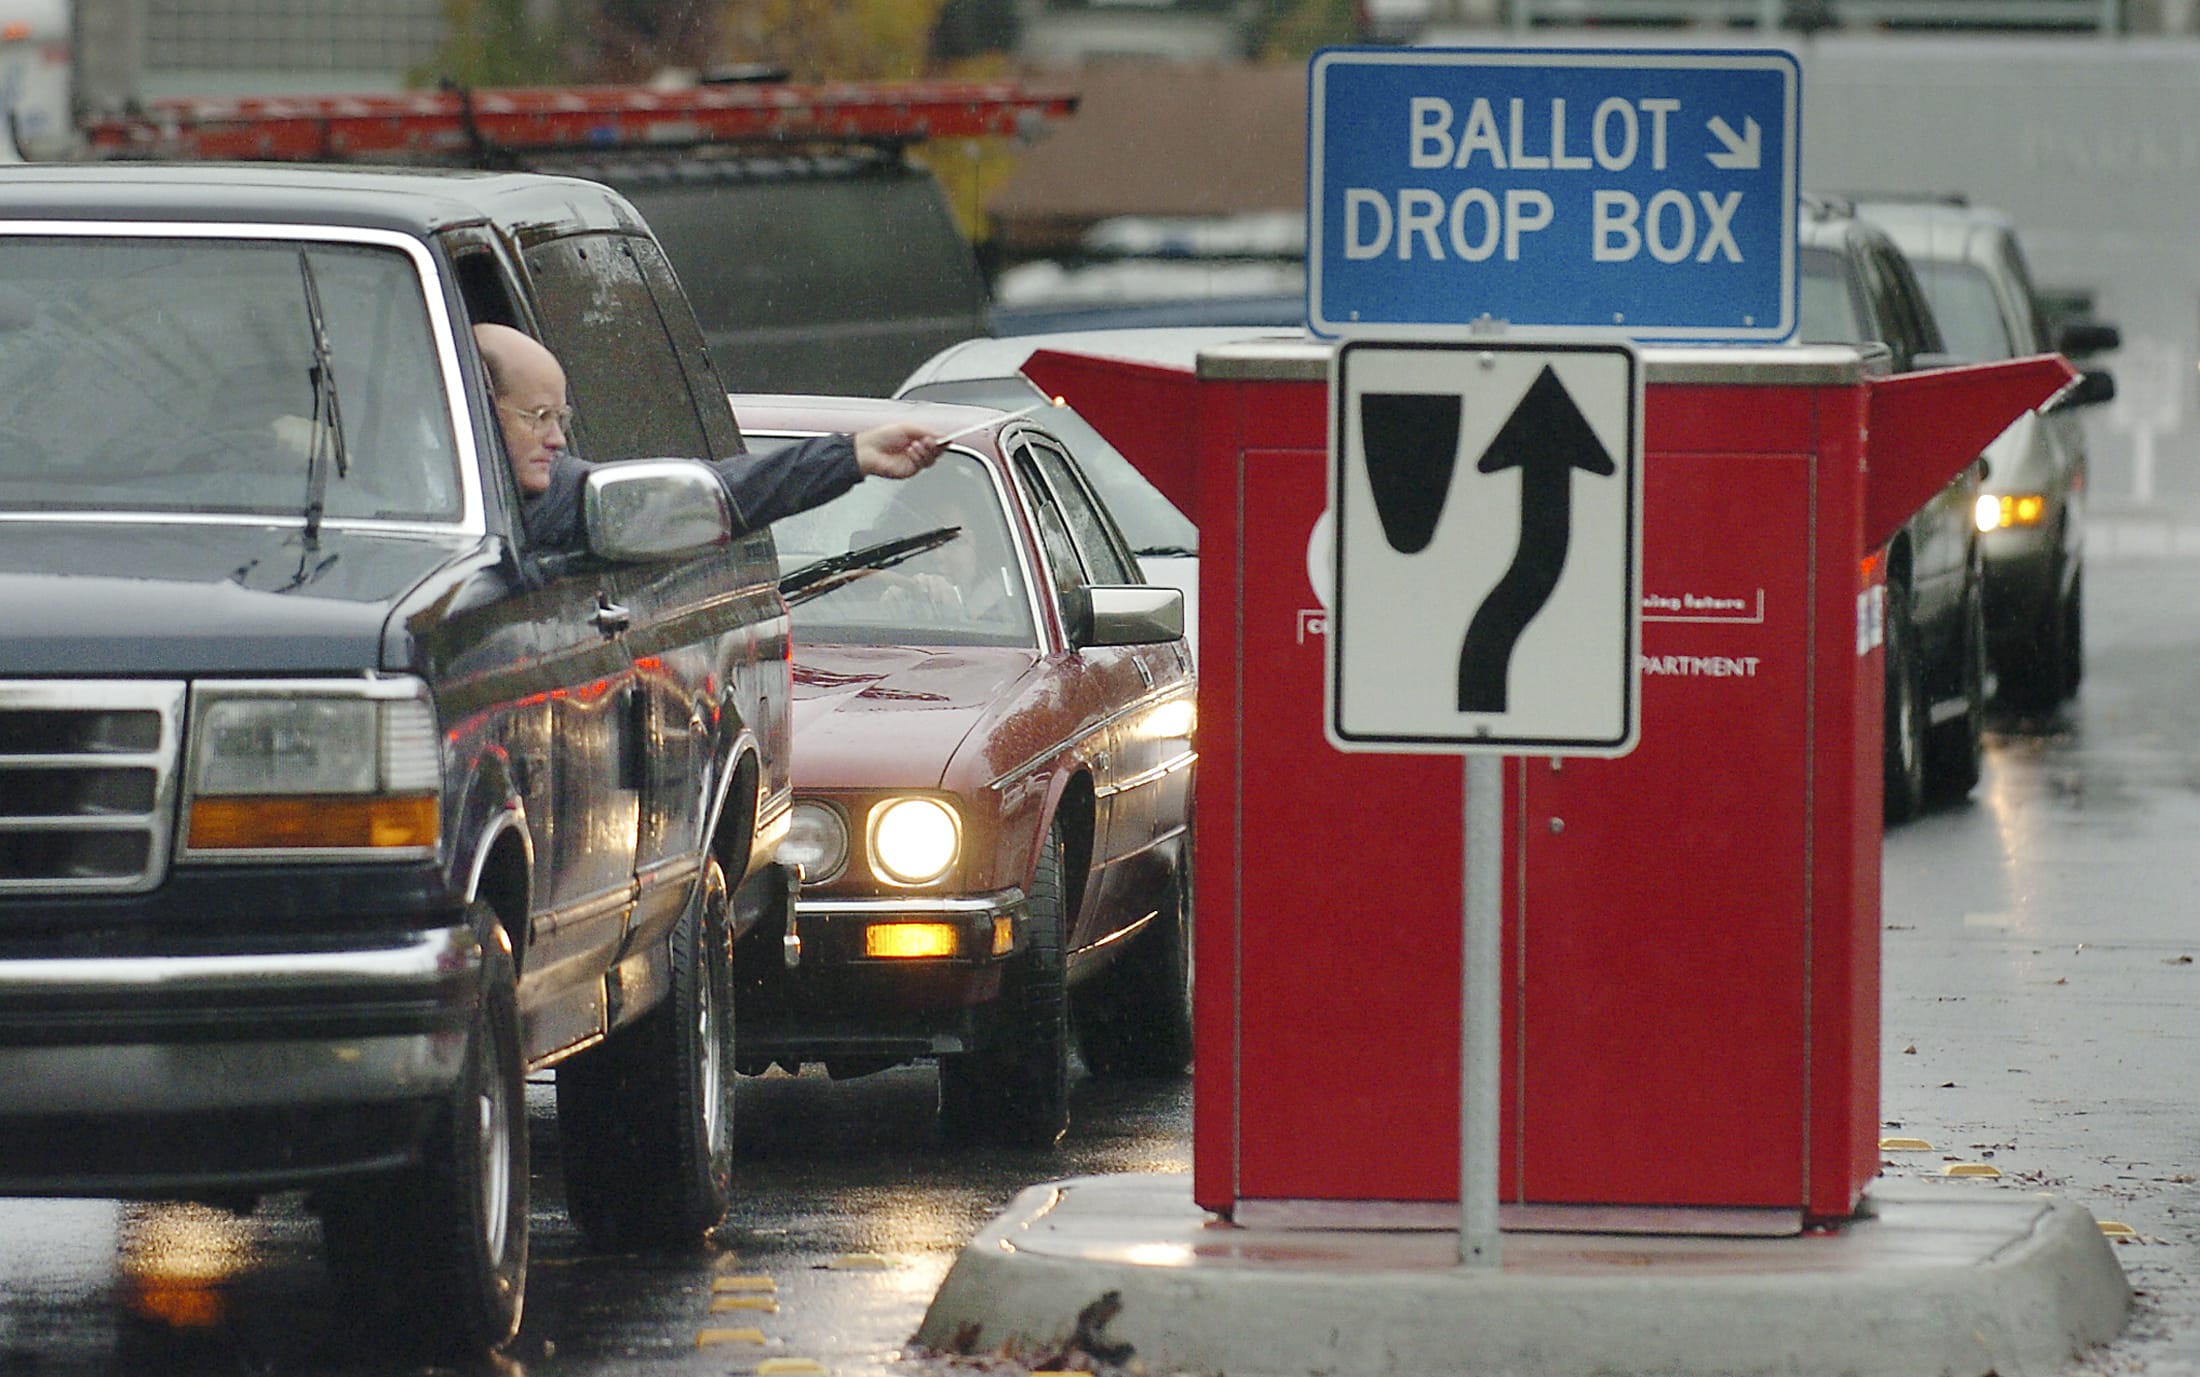 A steady stream of cars visits the ballot drop box at West 14th and Esther streets every major election. With ballots now including prepaid postage, voters do not need to stop by a ballot drop box if they want to return their ballot for free.